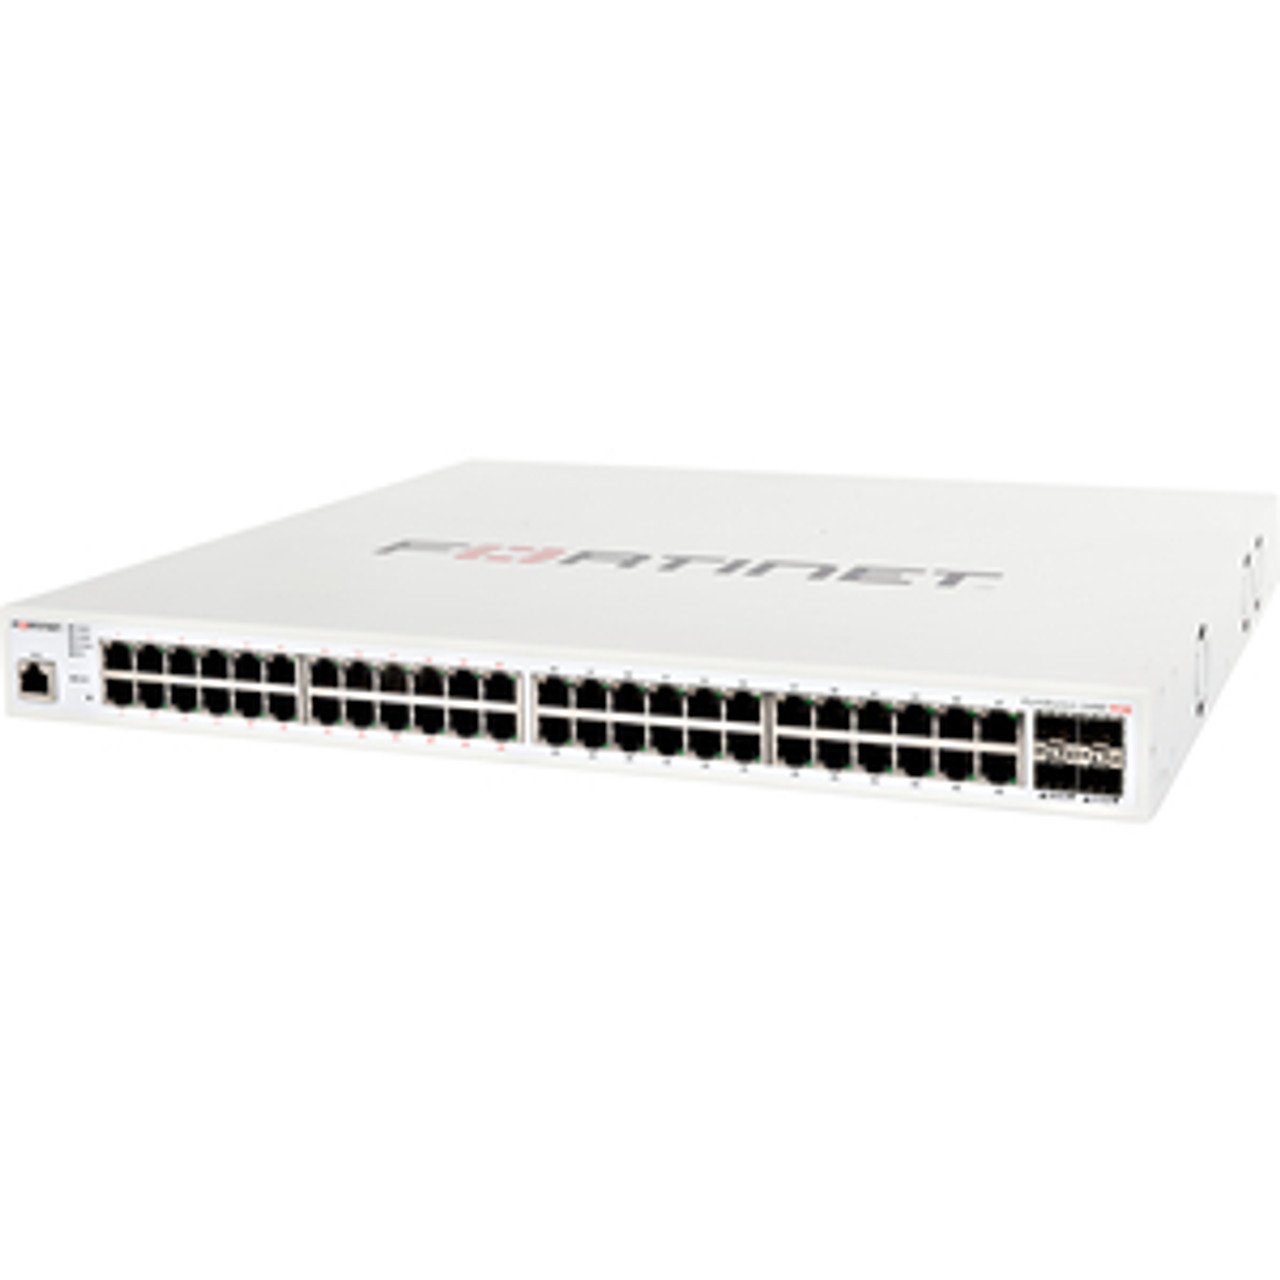 Fortinet FortiSwitch FS-248E-POE Ethernet Switch - 48 Ports - Manageable - 3 Layer Supported - Modular - 4 SFP Slots - Optical Fiber, Twisted Pair - 1U High - Rack-mountable - Lifetime Limited Warranty - FS-248E-POE